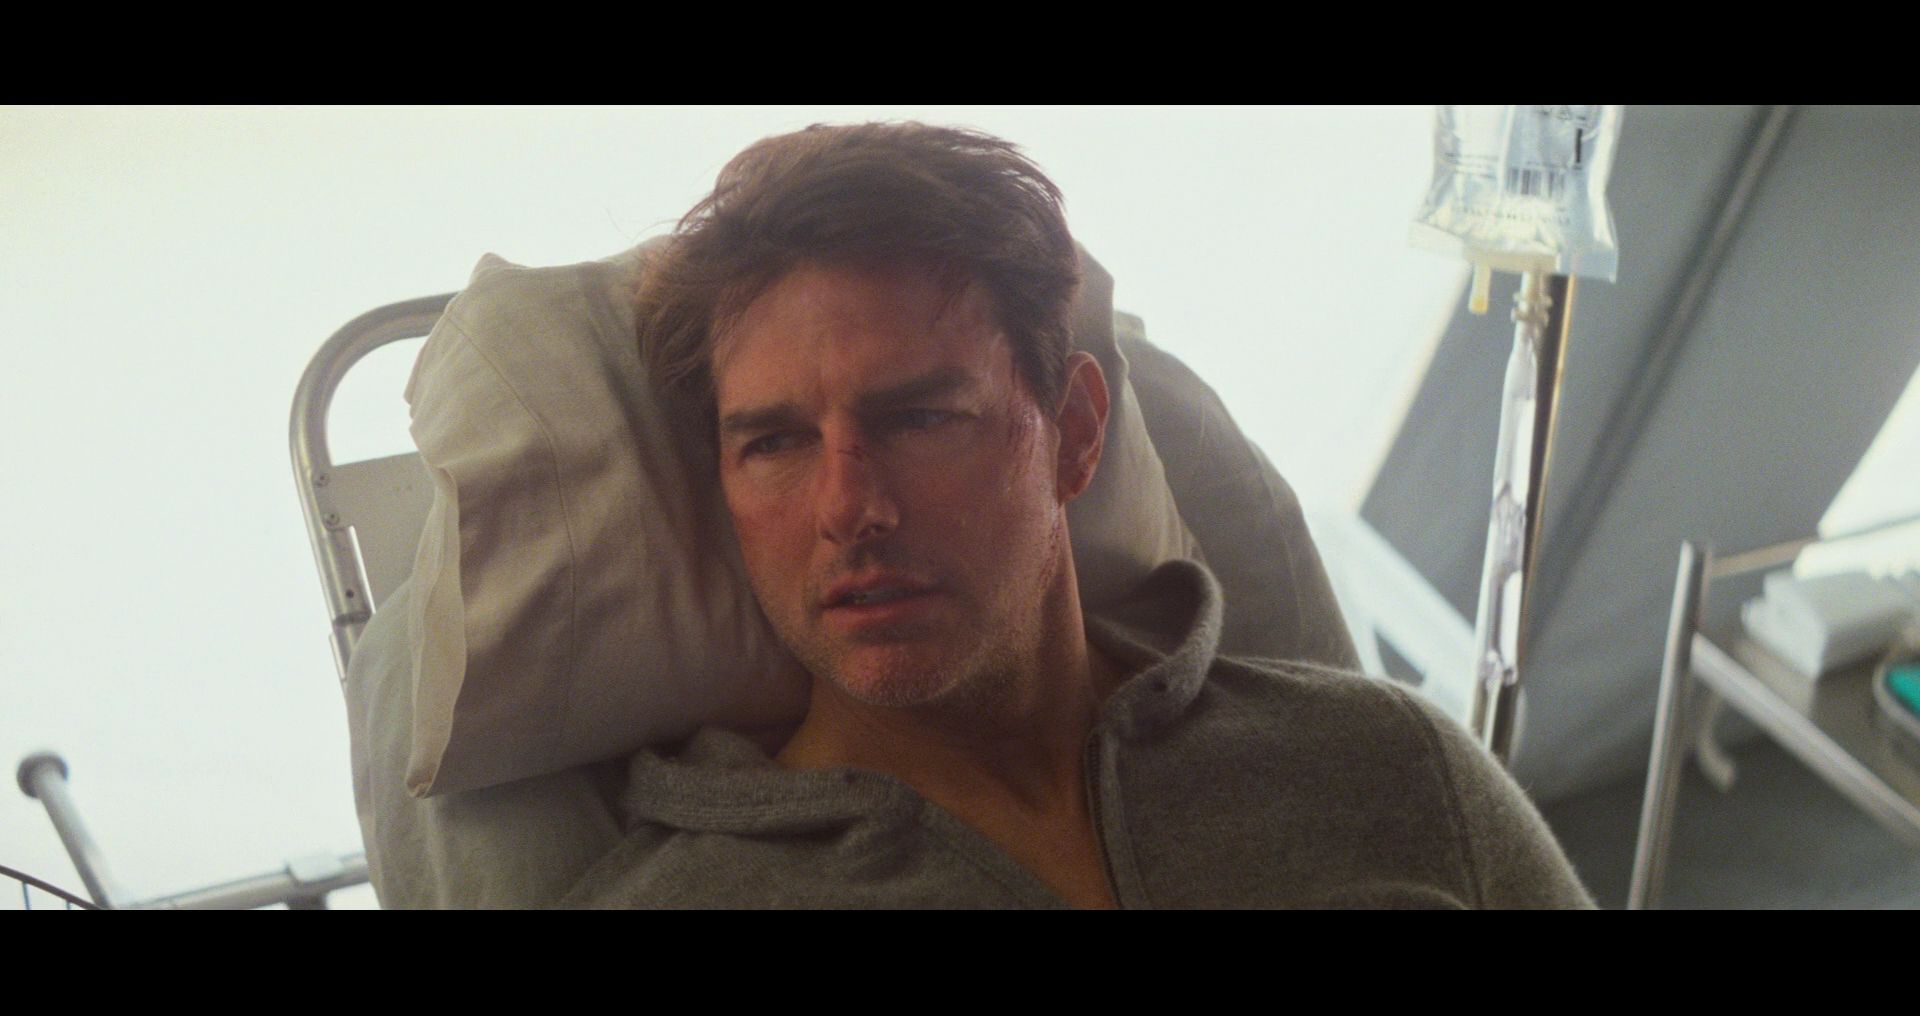 Mission-Impossible-Fallout-3915.jpg